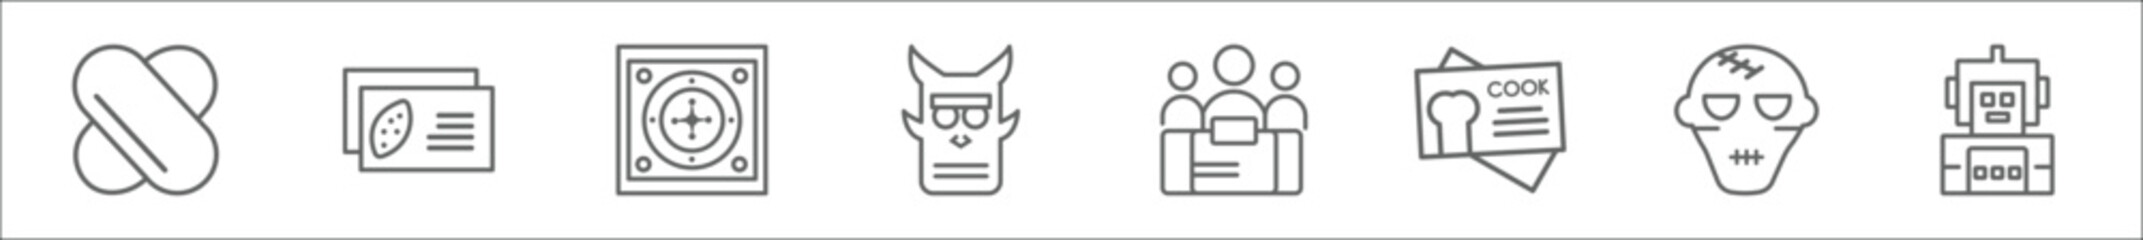 outline set of other line icons. linear vector icons such as interlock, green leaf business card, roulette table, japanese demon, limited liability, cook business card, monster, robot of japan